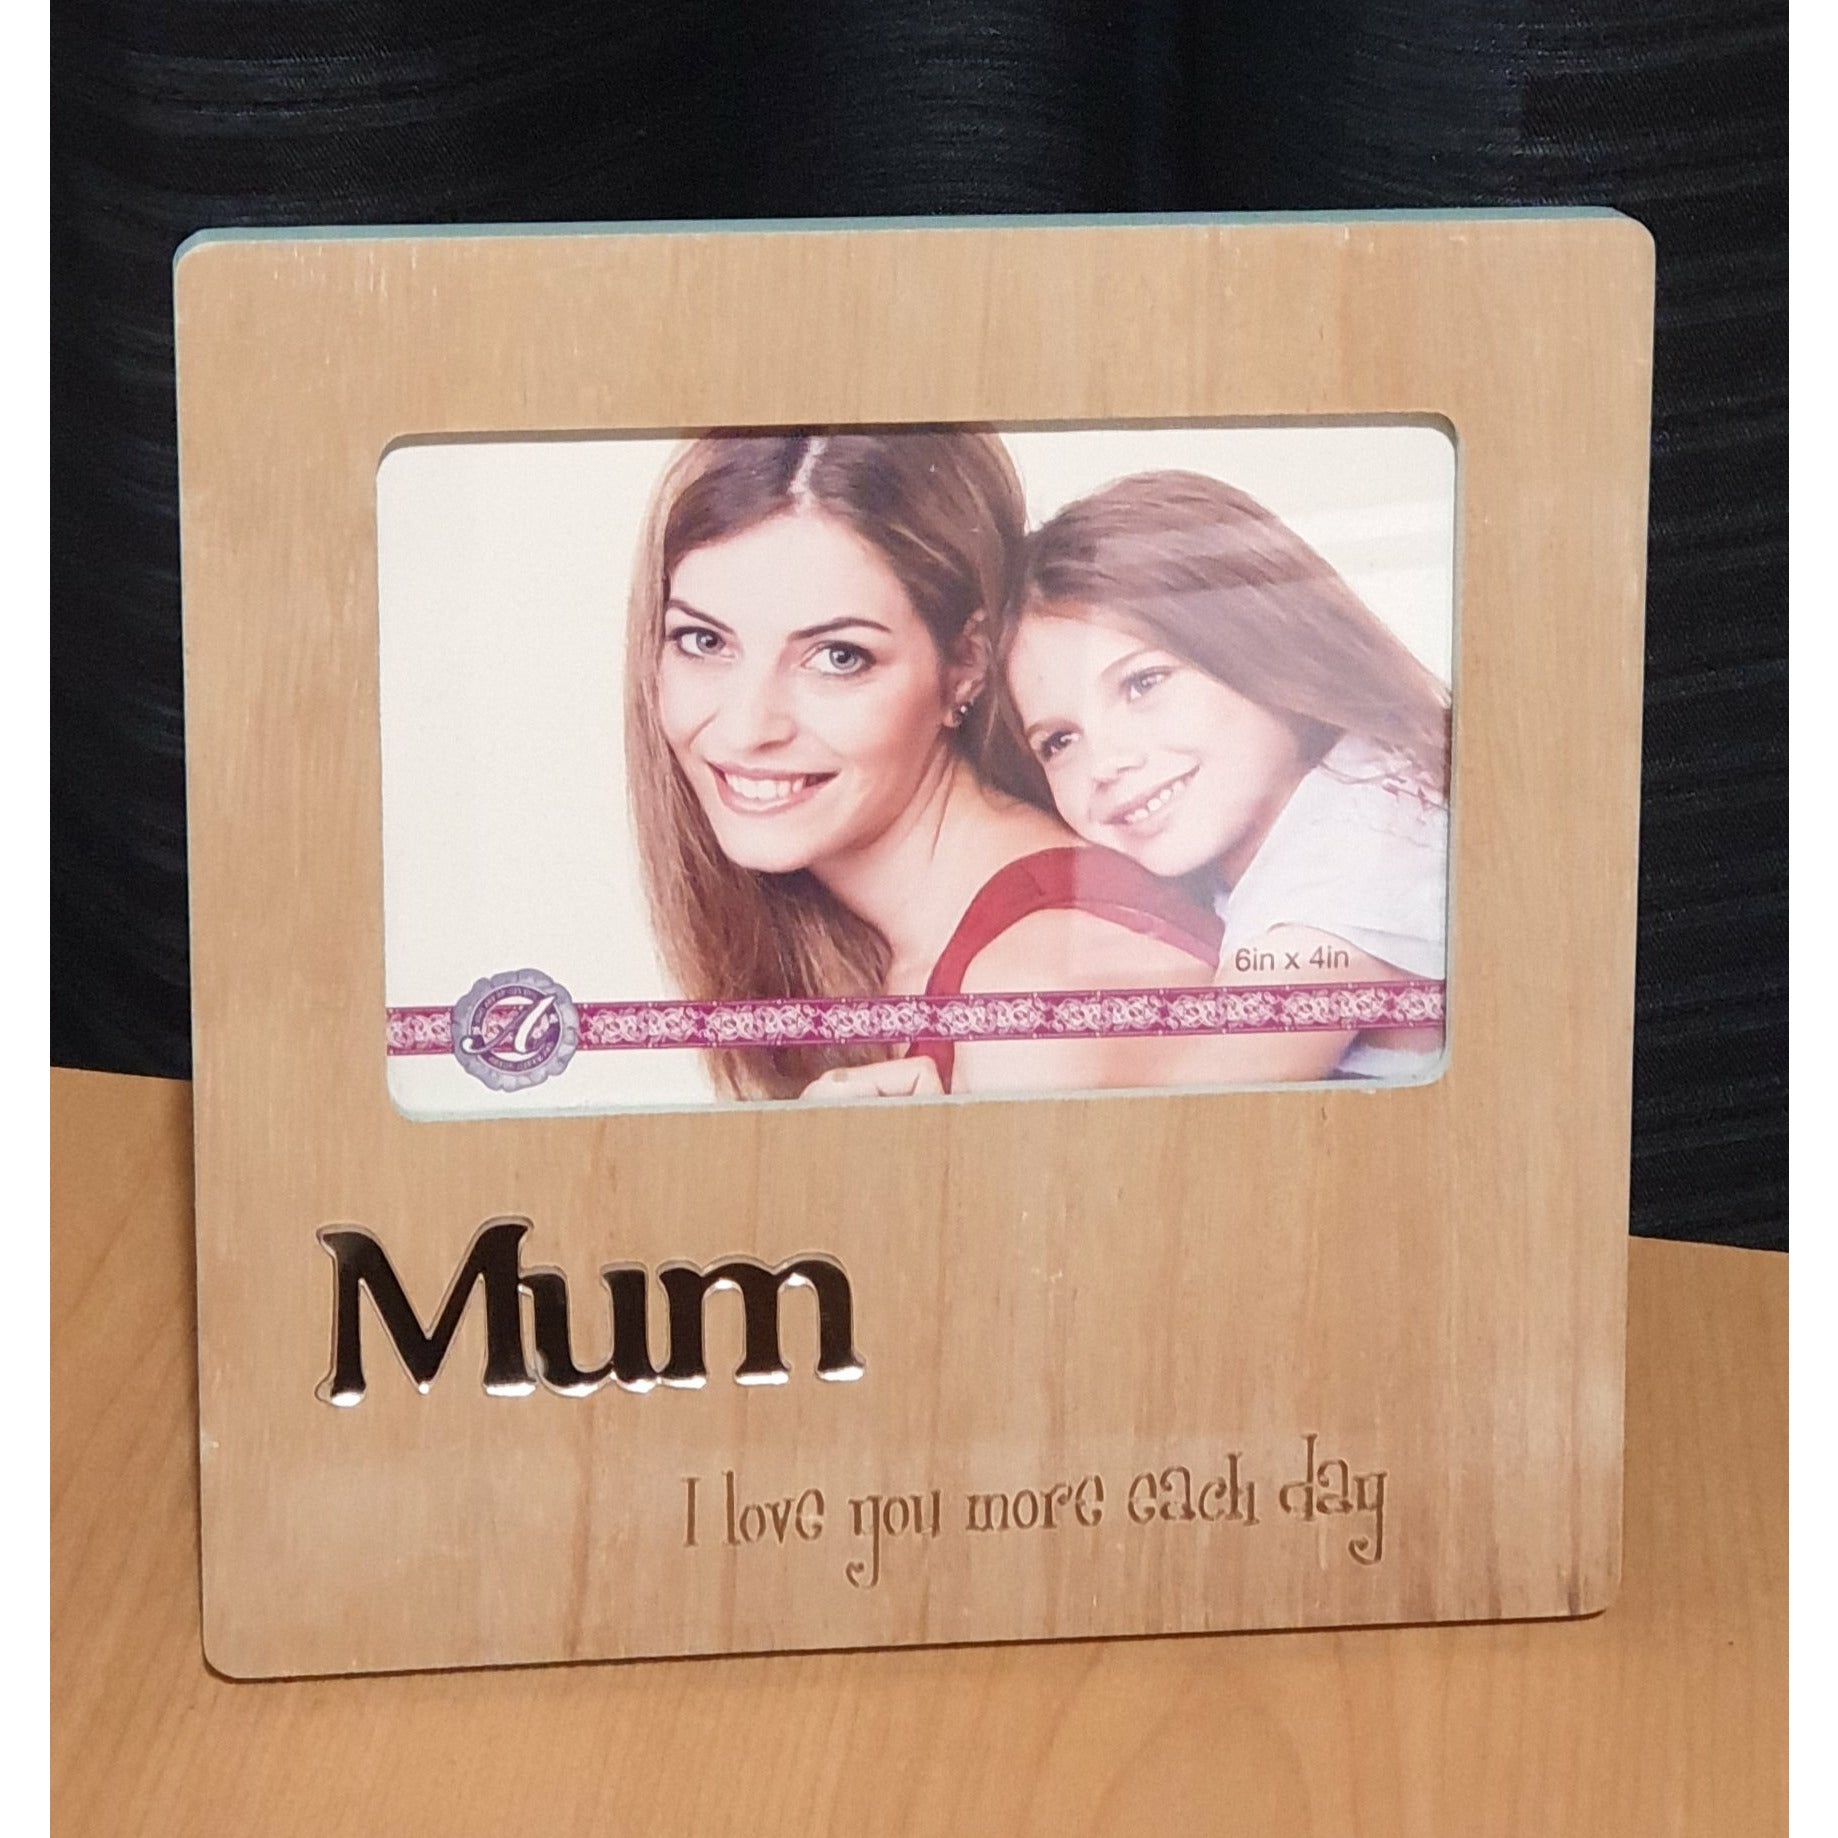 Mum - Photoframe Not specified